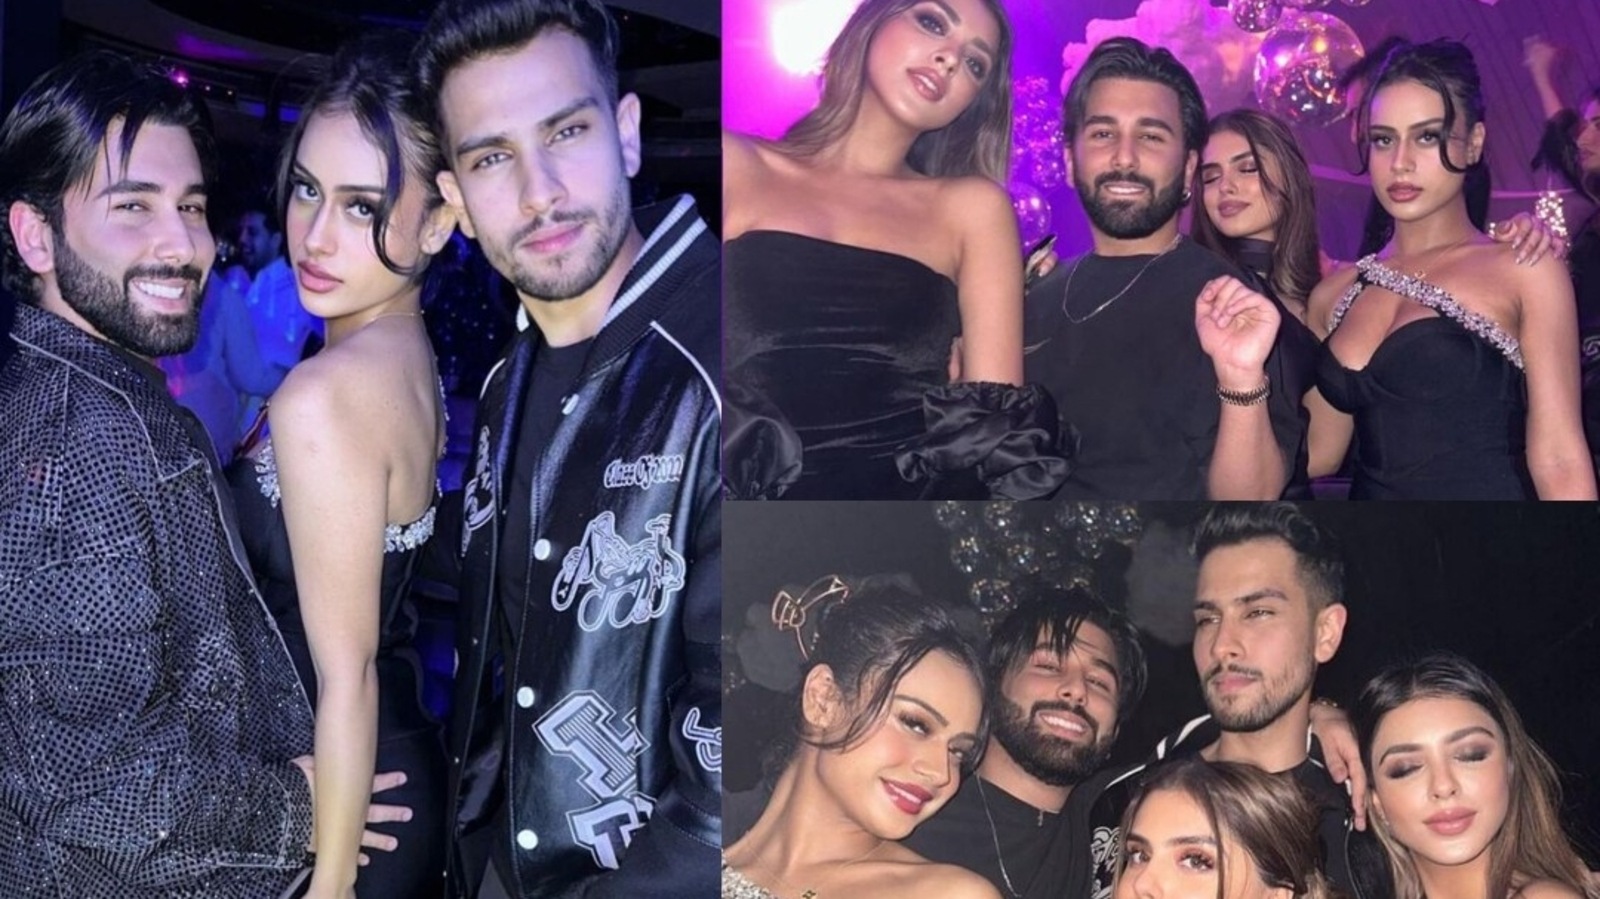 Nysa Devgan rings in new year with Ahan Shetty and friends at Dubai bash. Watch